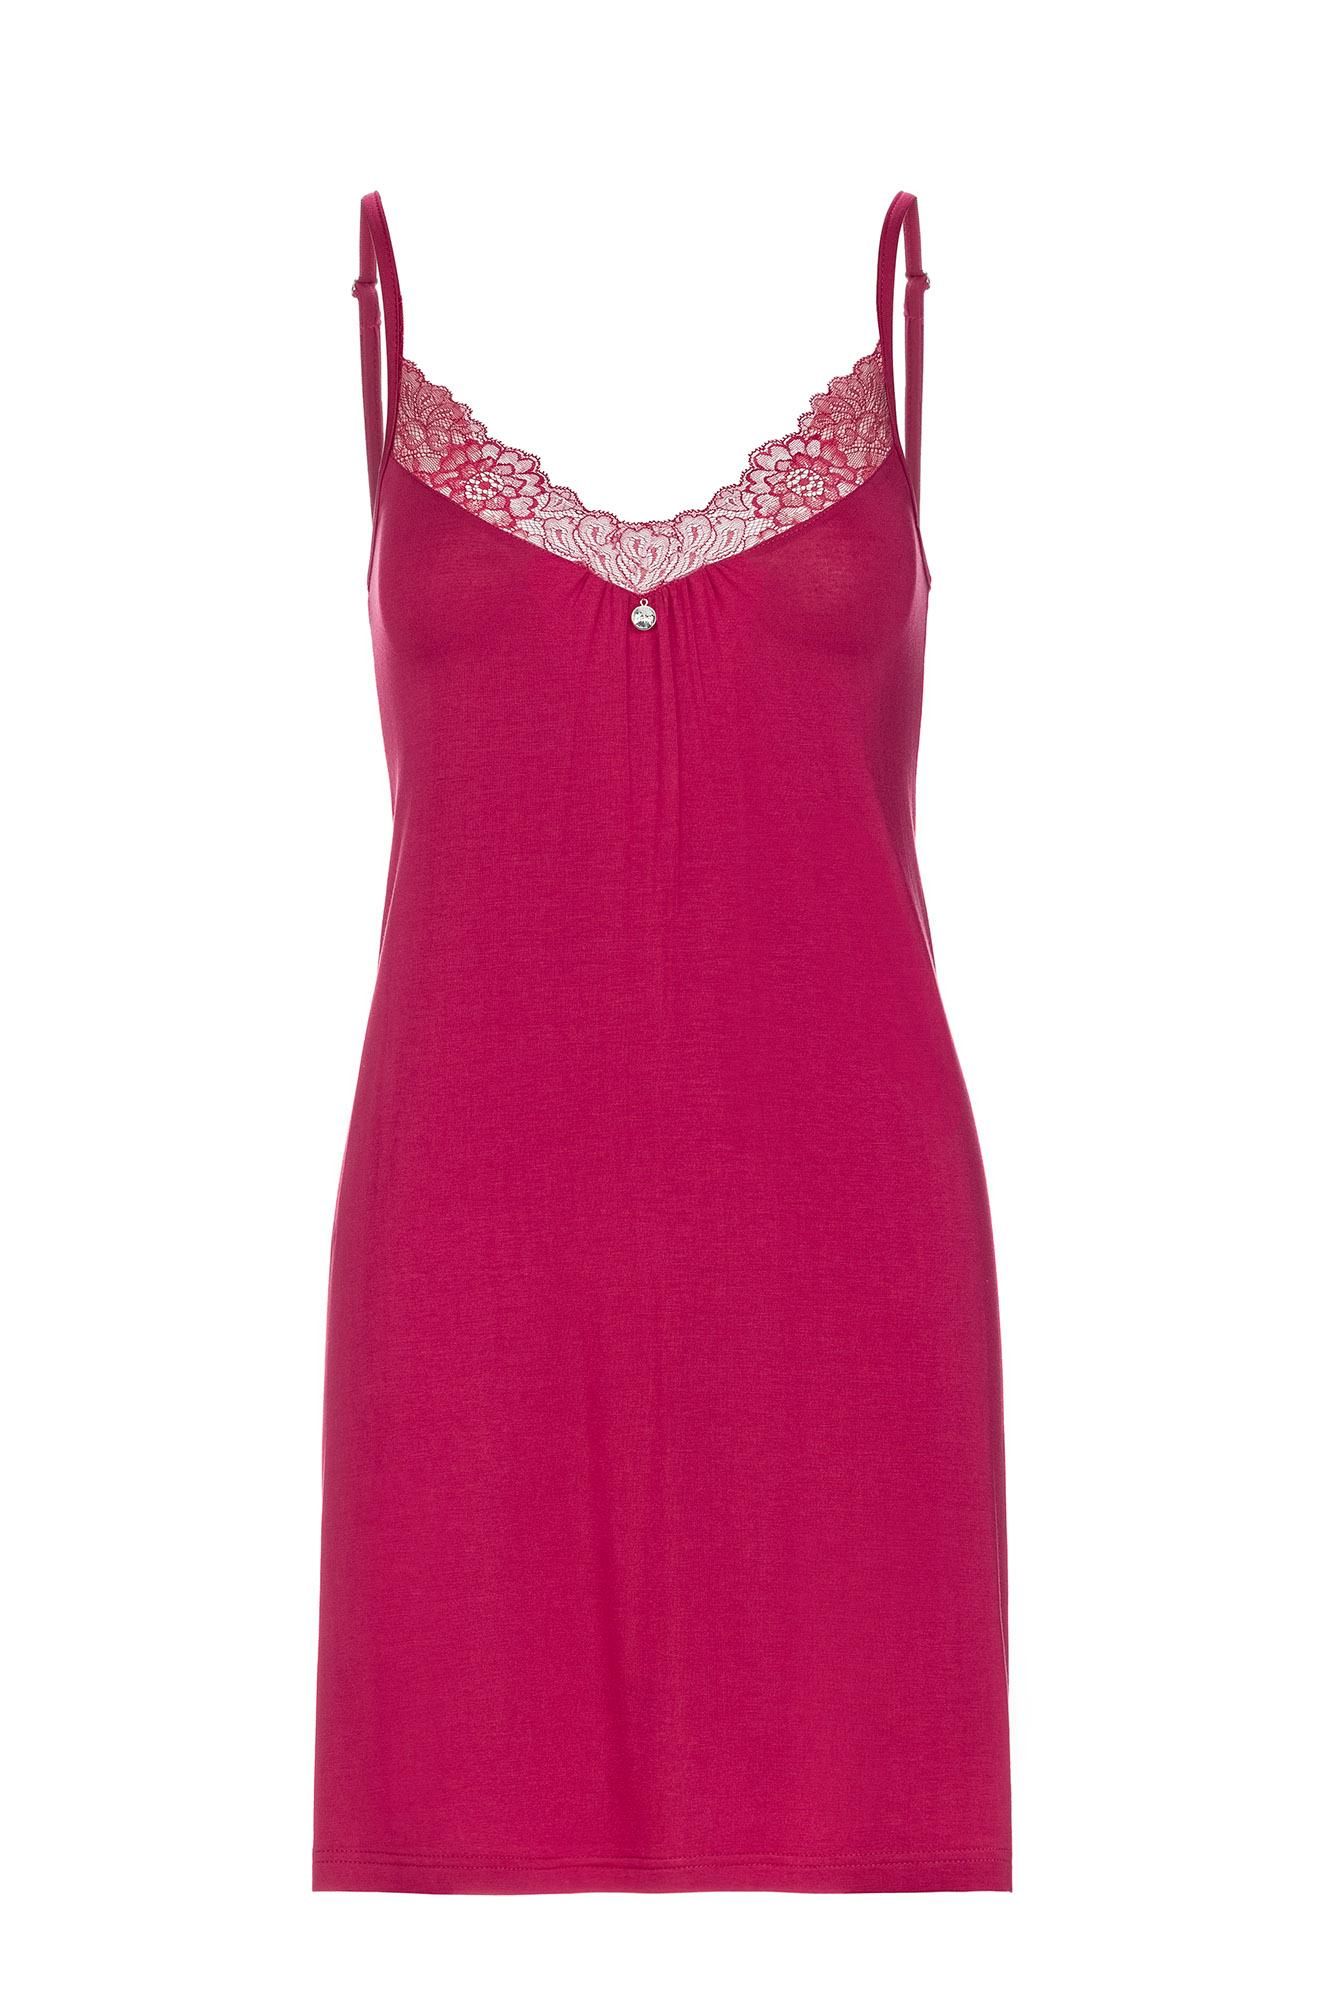 Women’s Sleeveless Nightgown with Lace Details